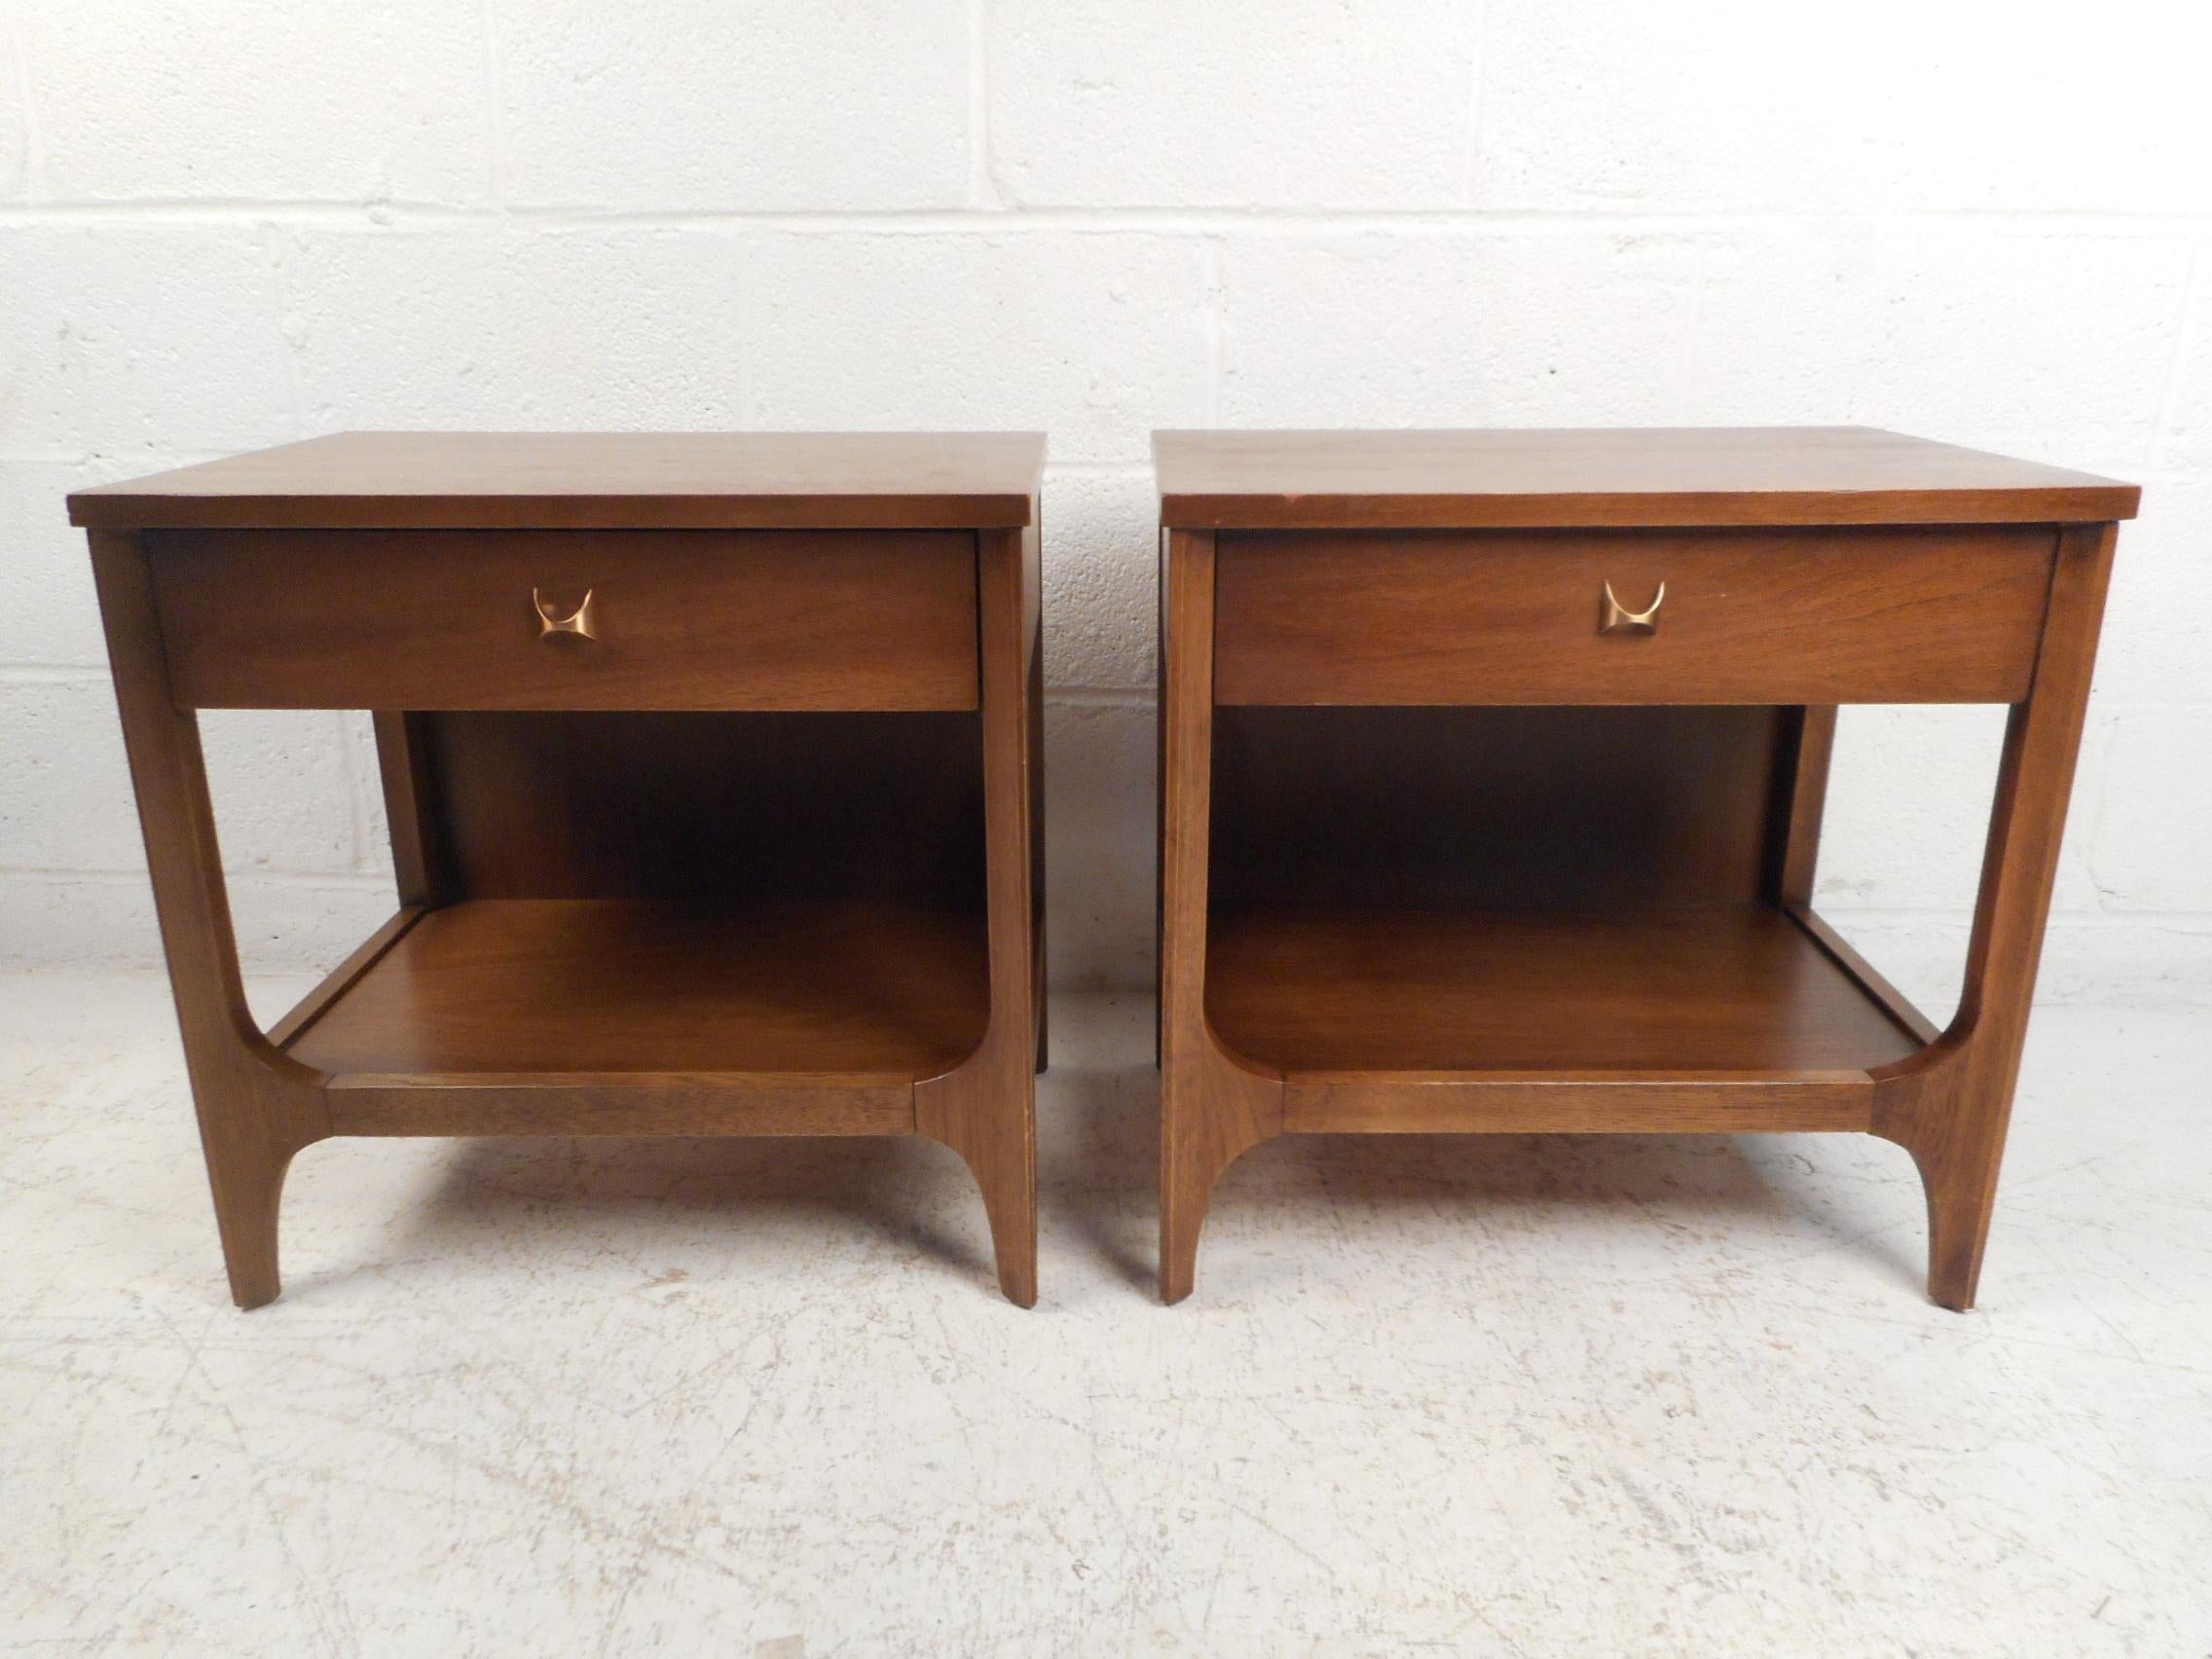 Stylish pair of Mid-Century Modern nightstands or end tables manufactured by Broyhill. Signature brass drawer pulls open dovetail-jointed drawers, a shelf on the bottom of the tables offers additional storage space. Great midcentury pieces sure to